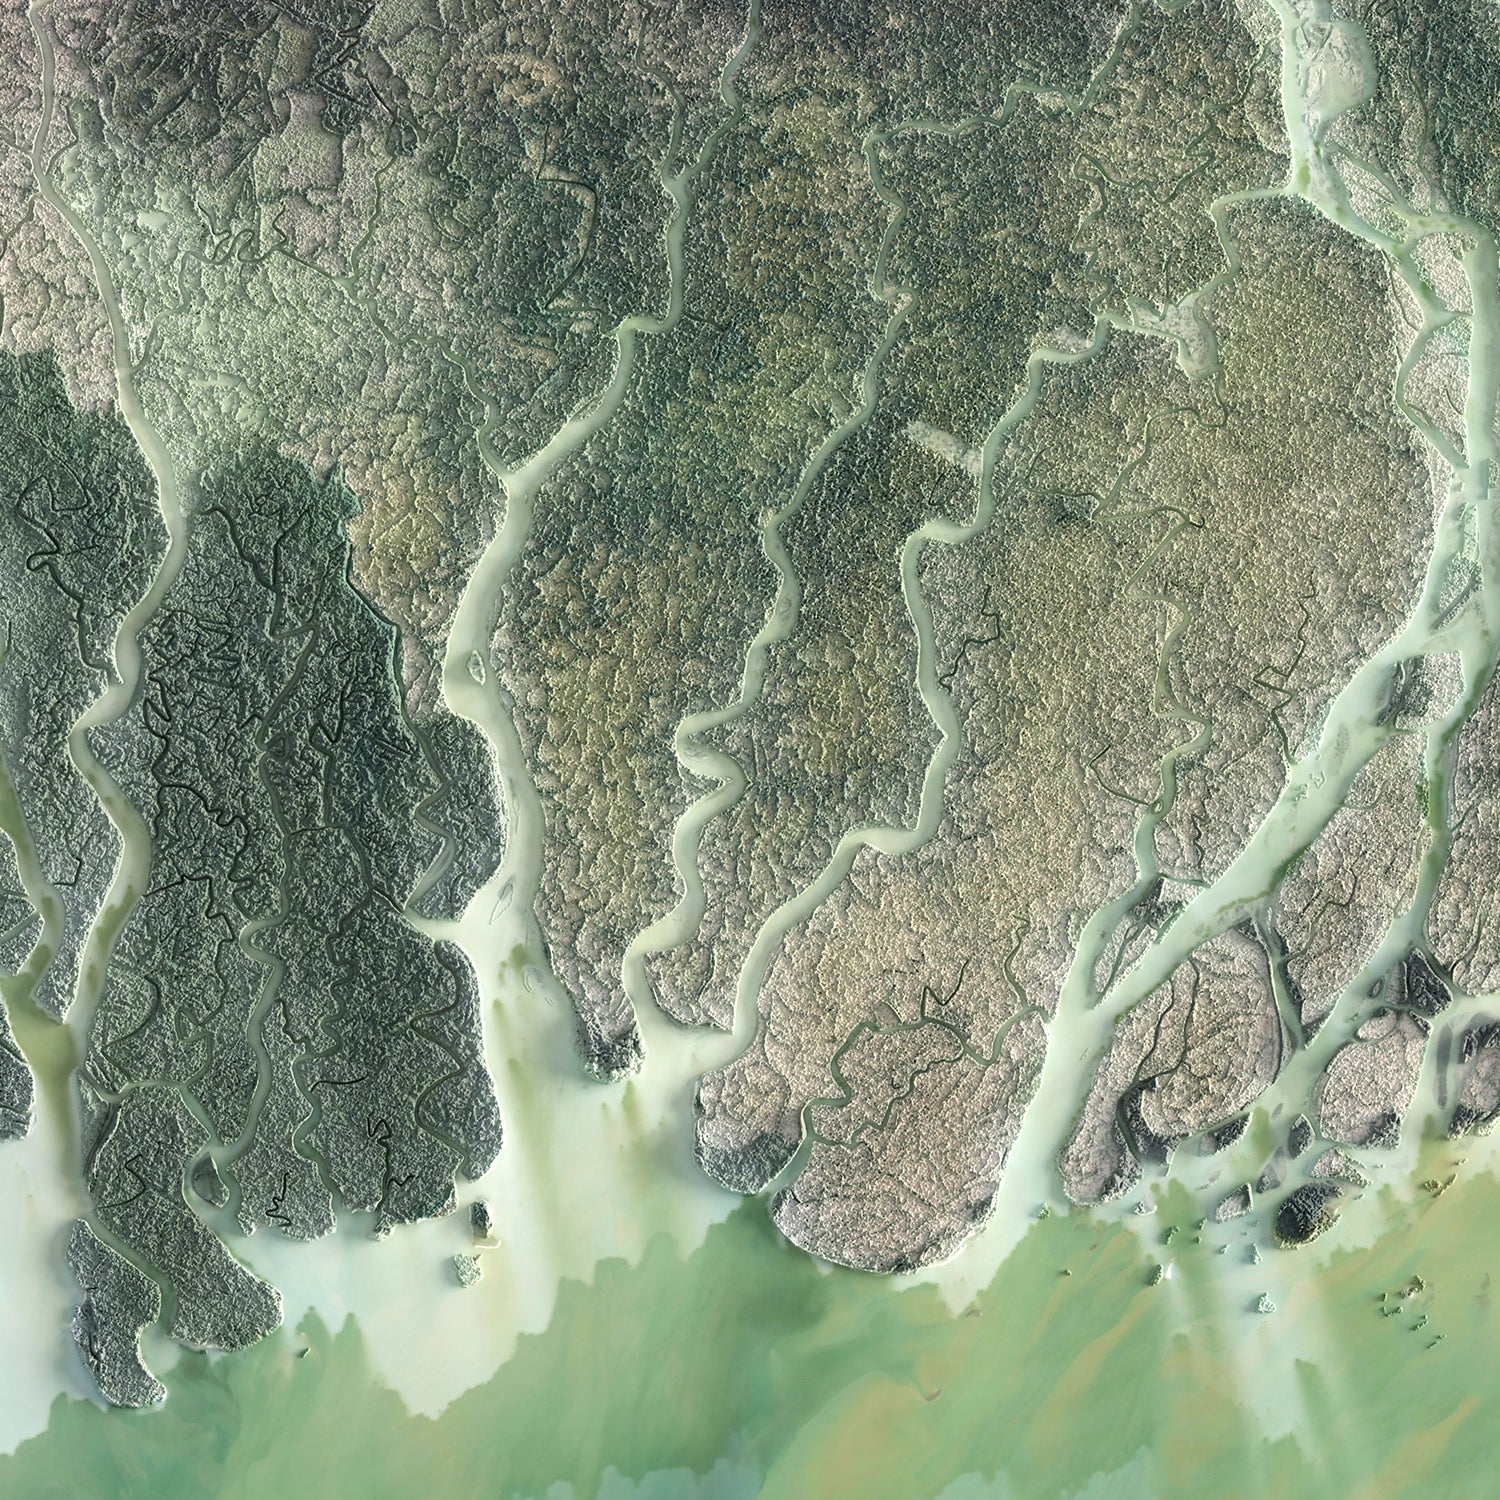 The Ganges Delta - Satellite Imagery